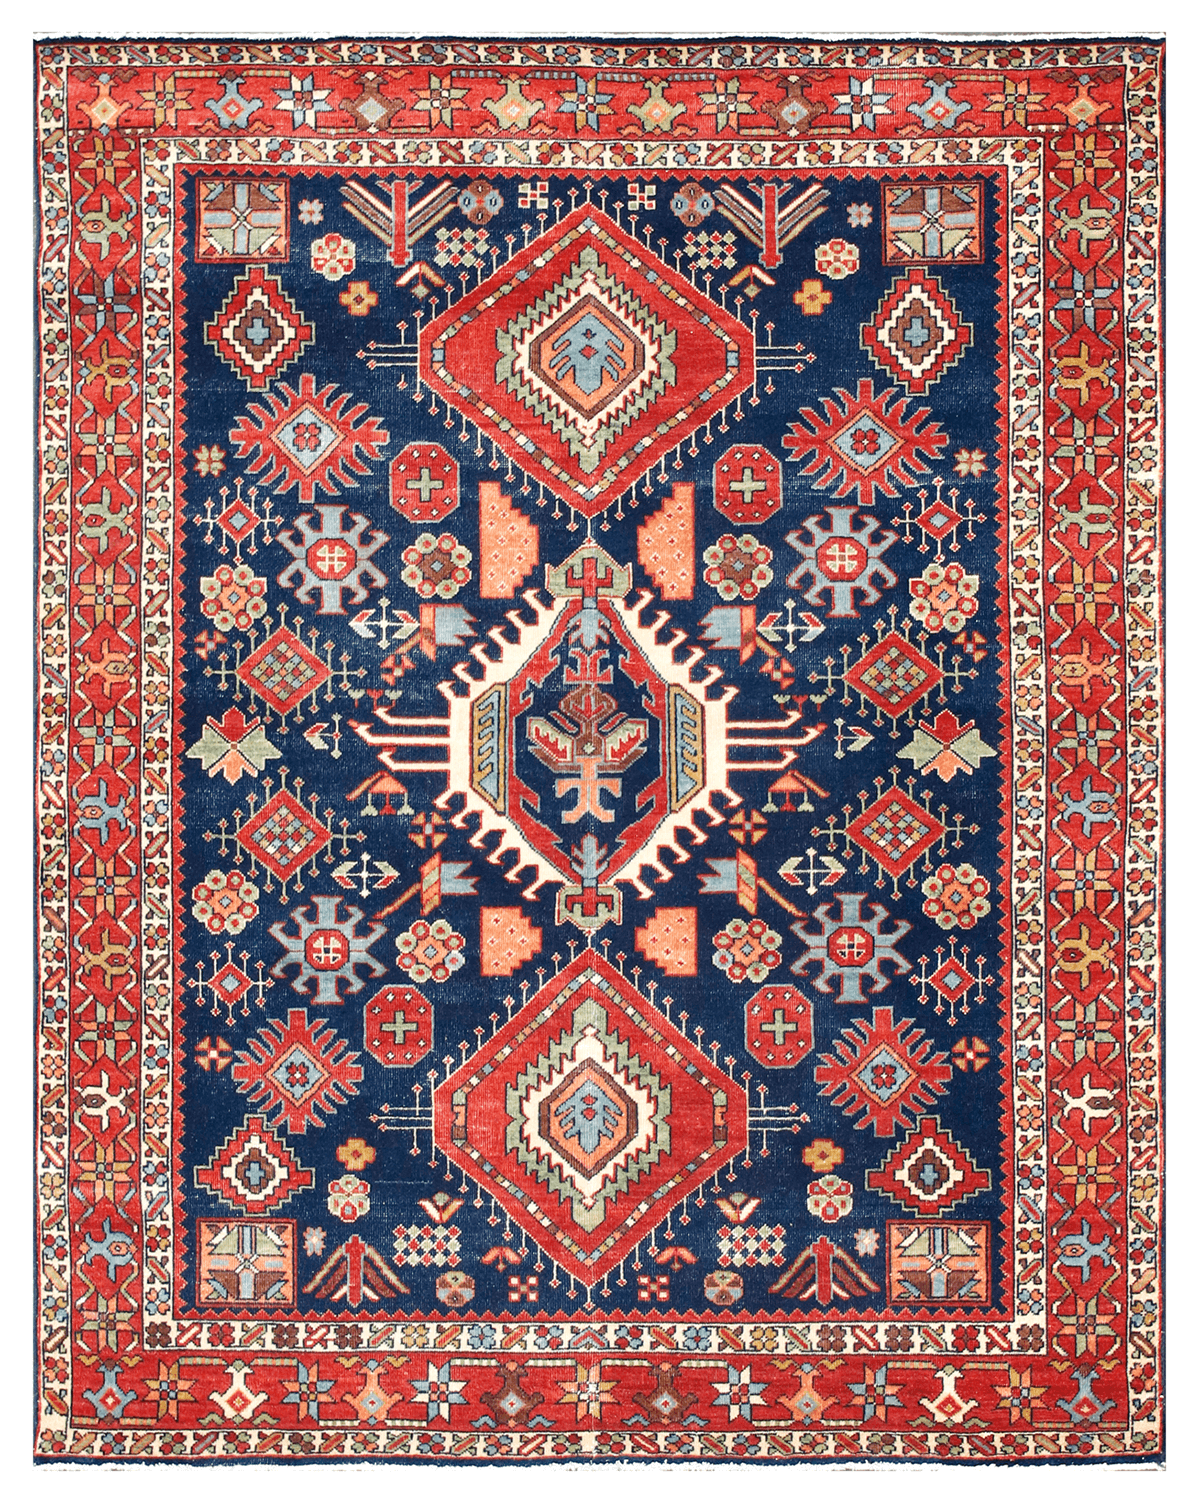 Traditional Hand-knotted Rug (KAZAK BL RD)